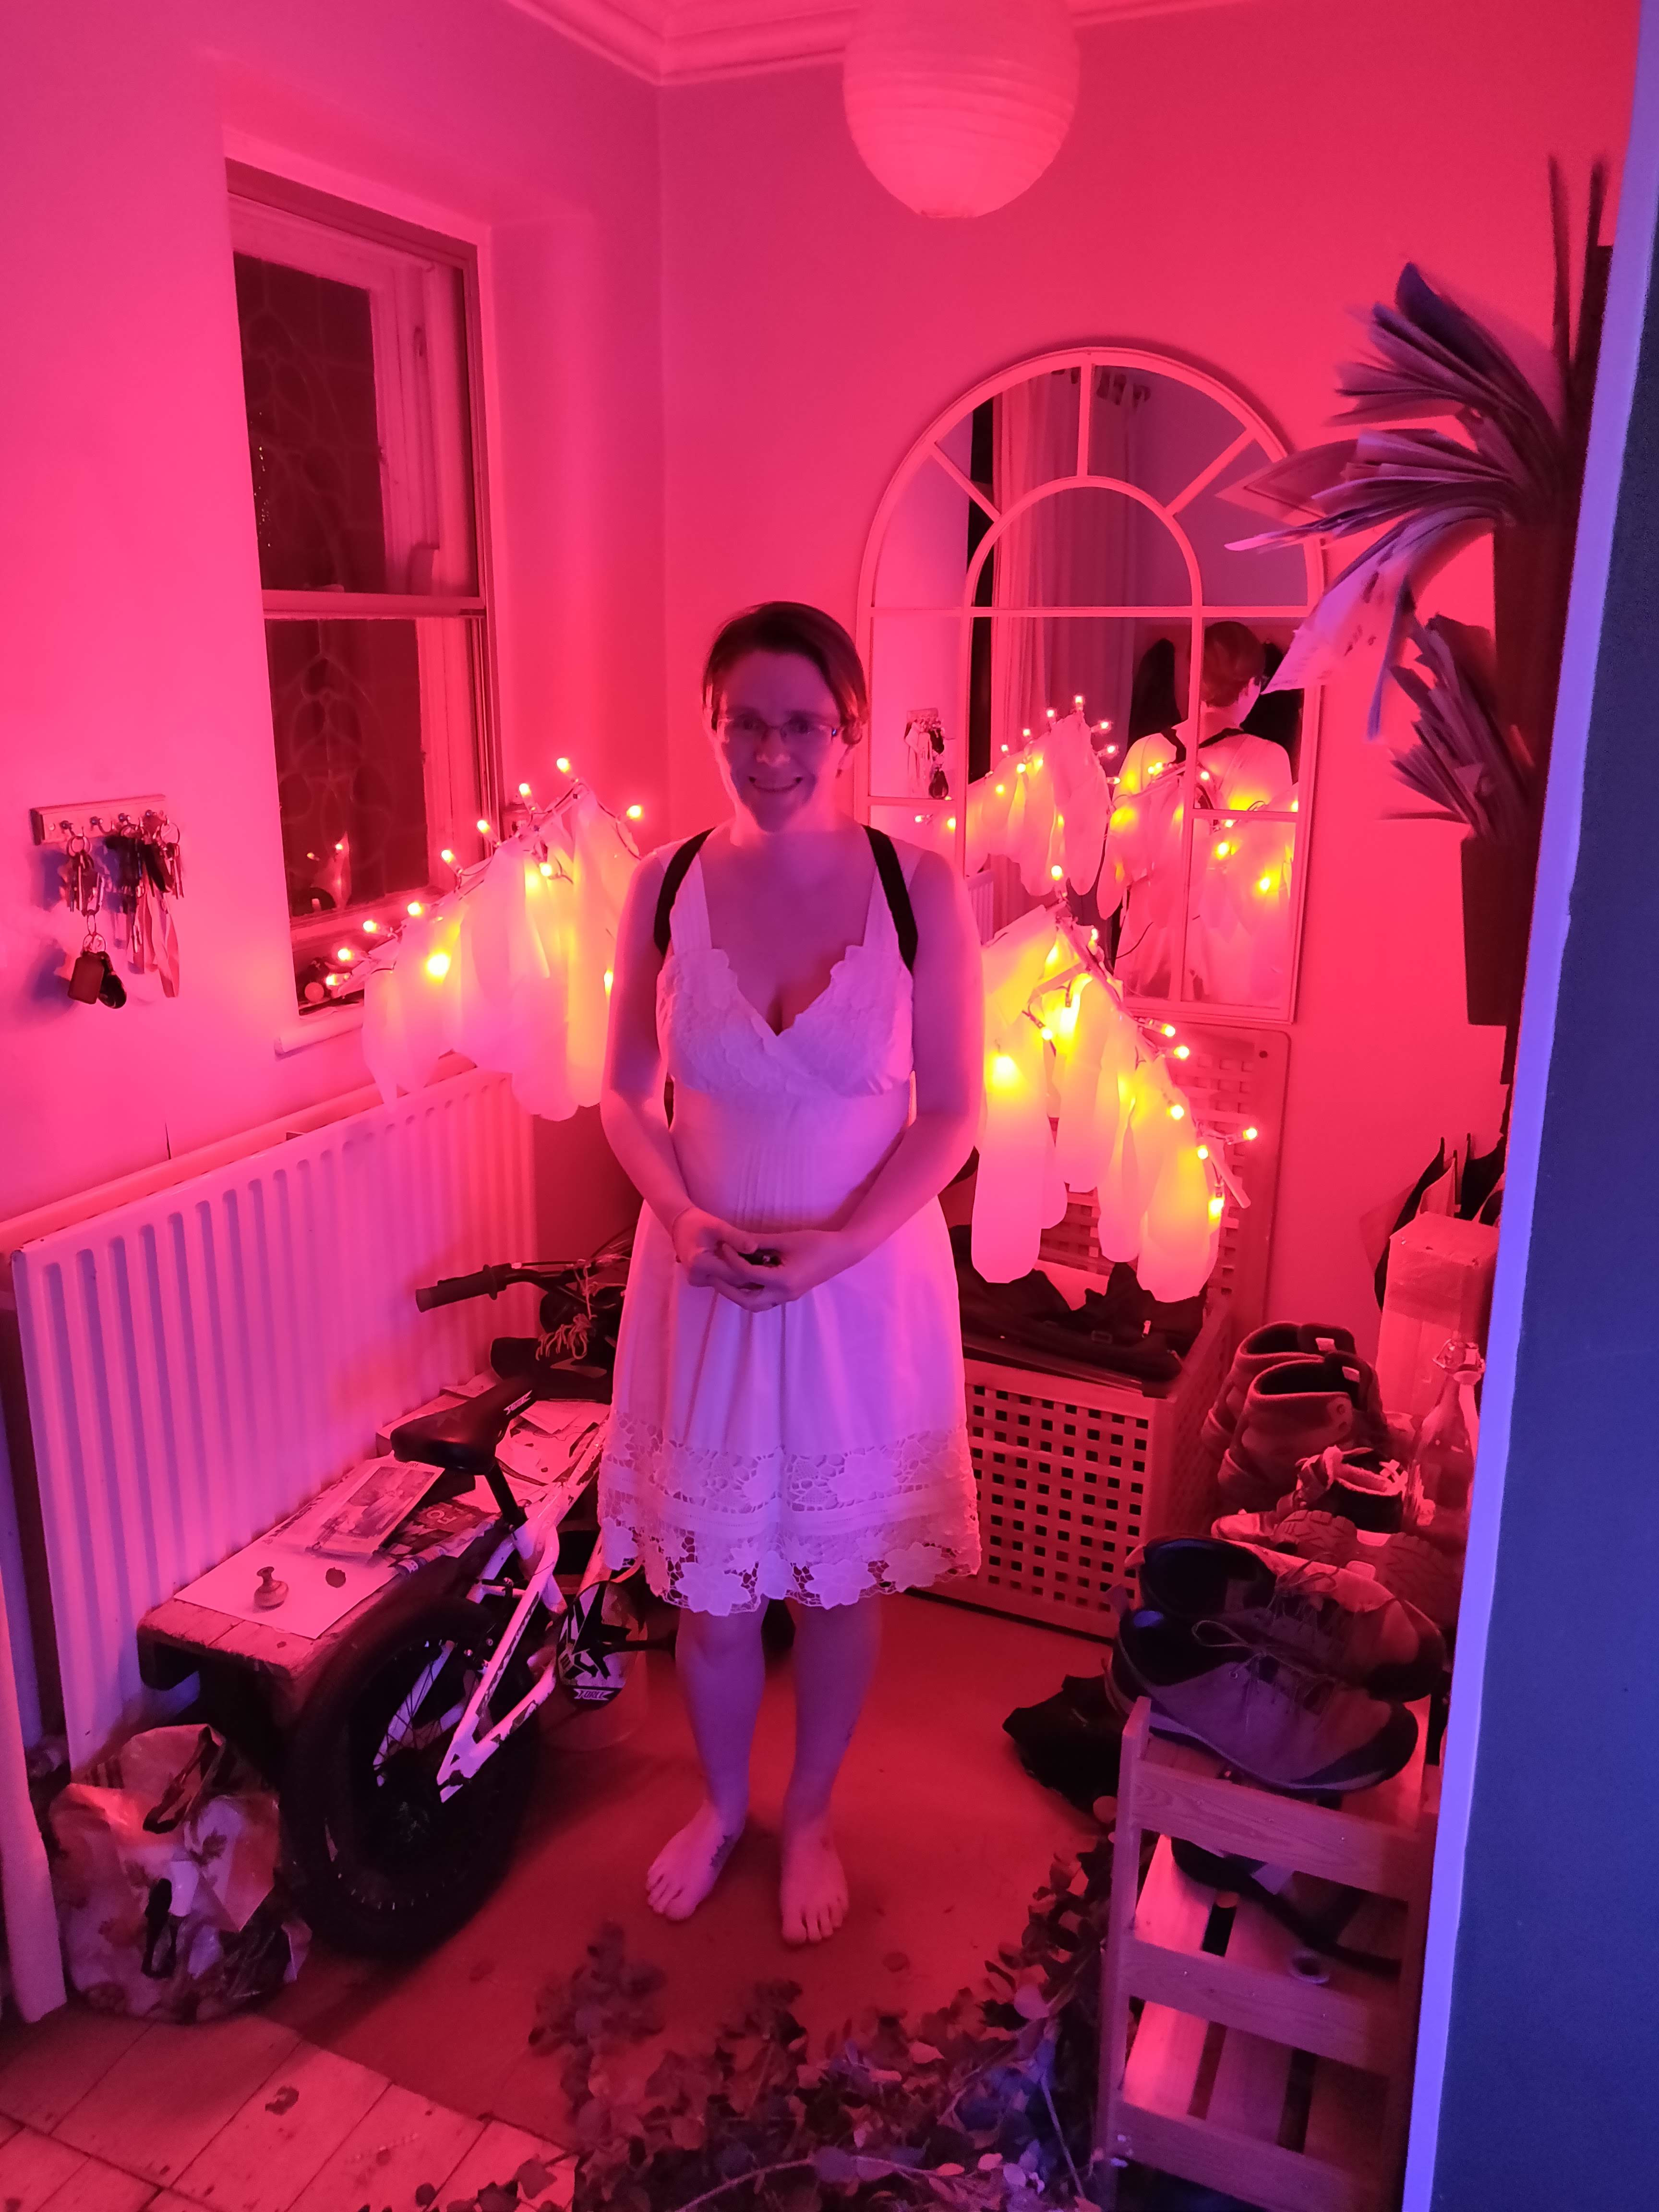 Light up and moving micro:bit angel wings